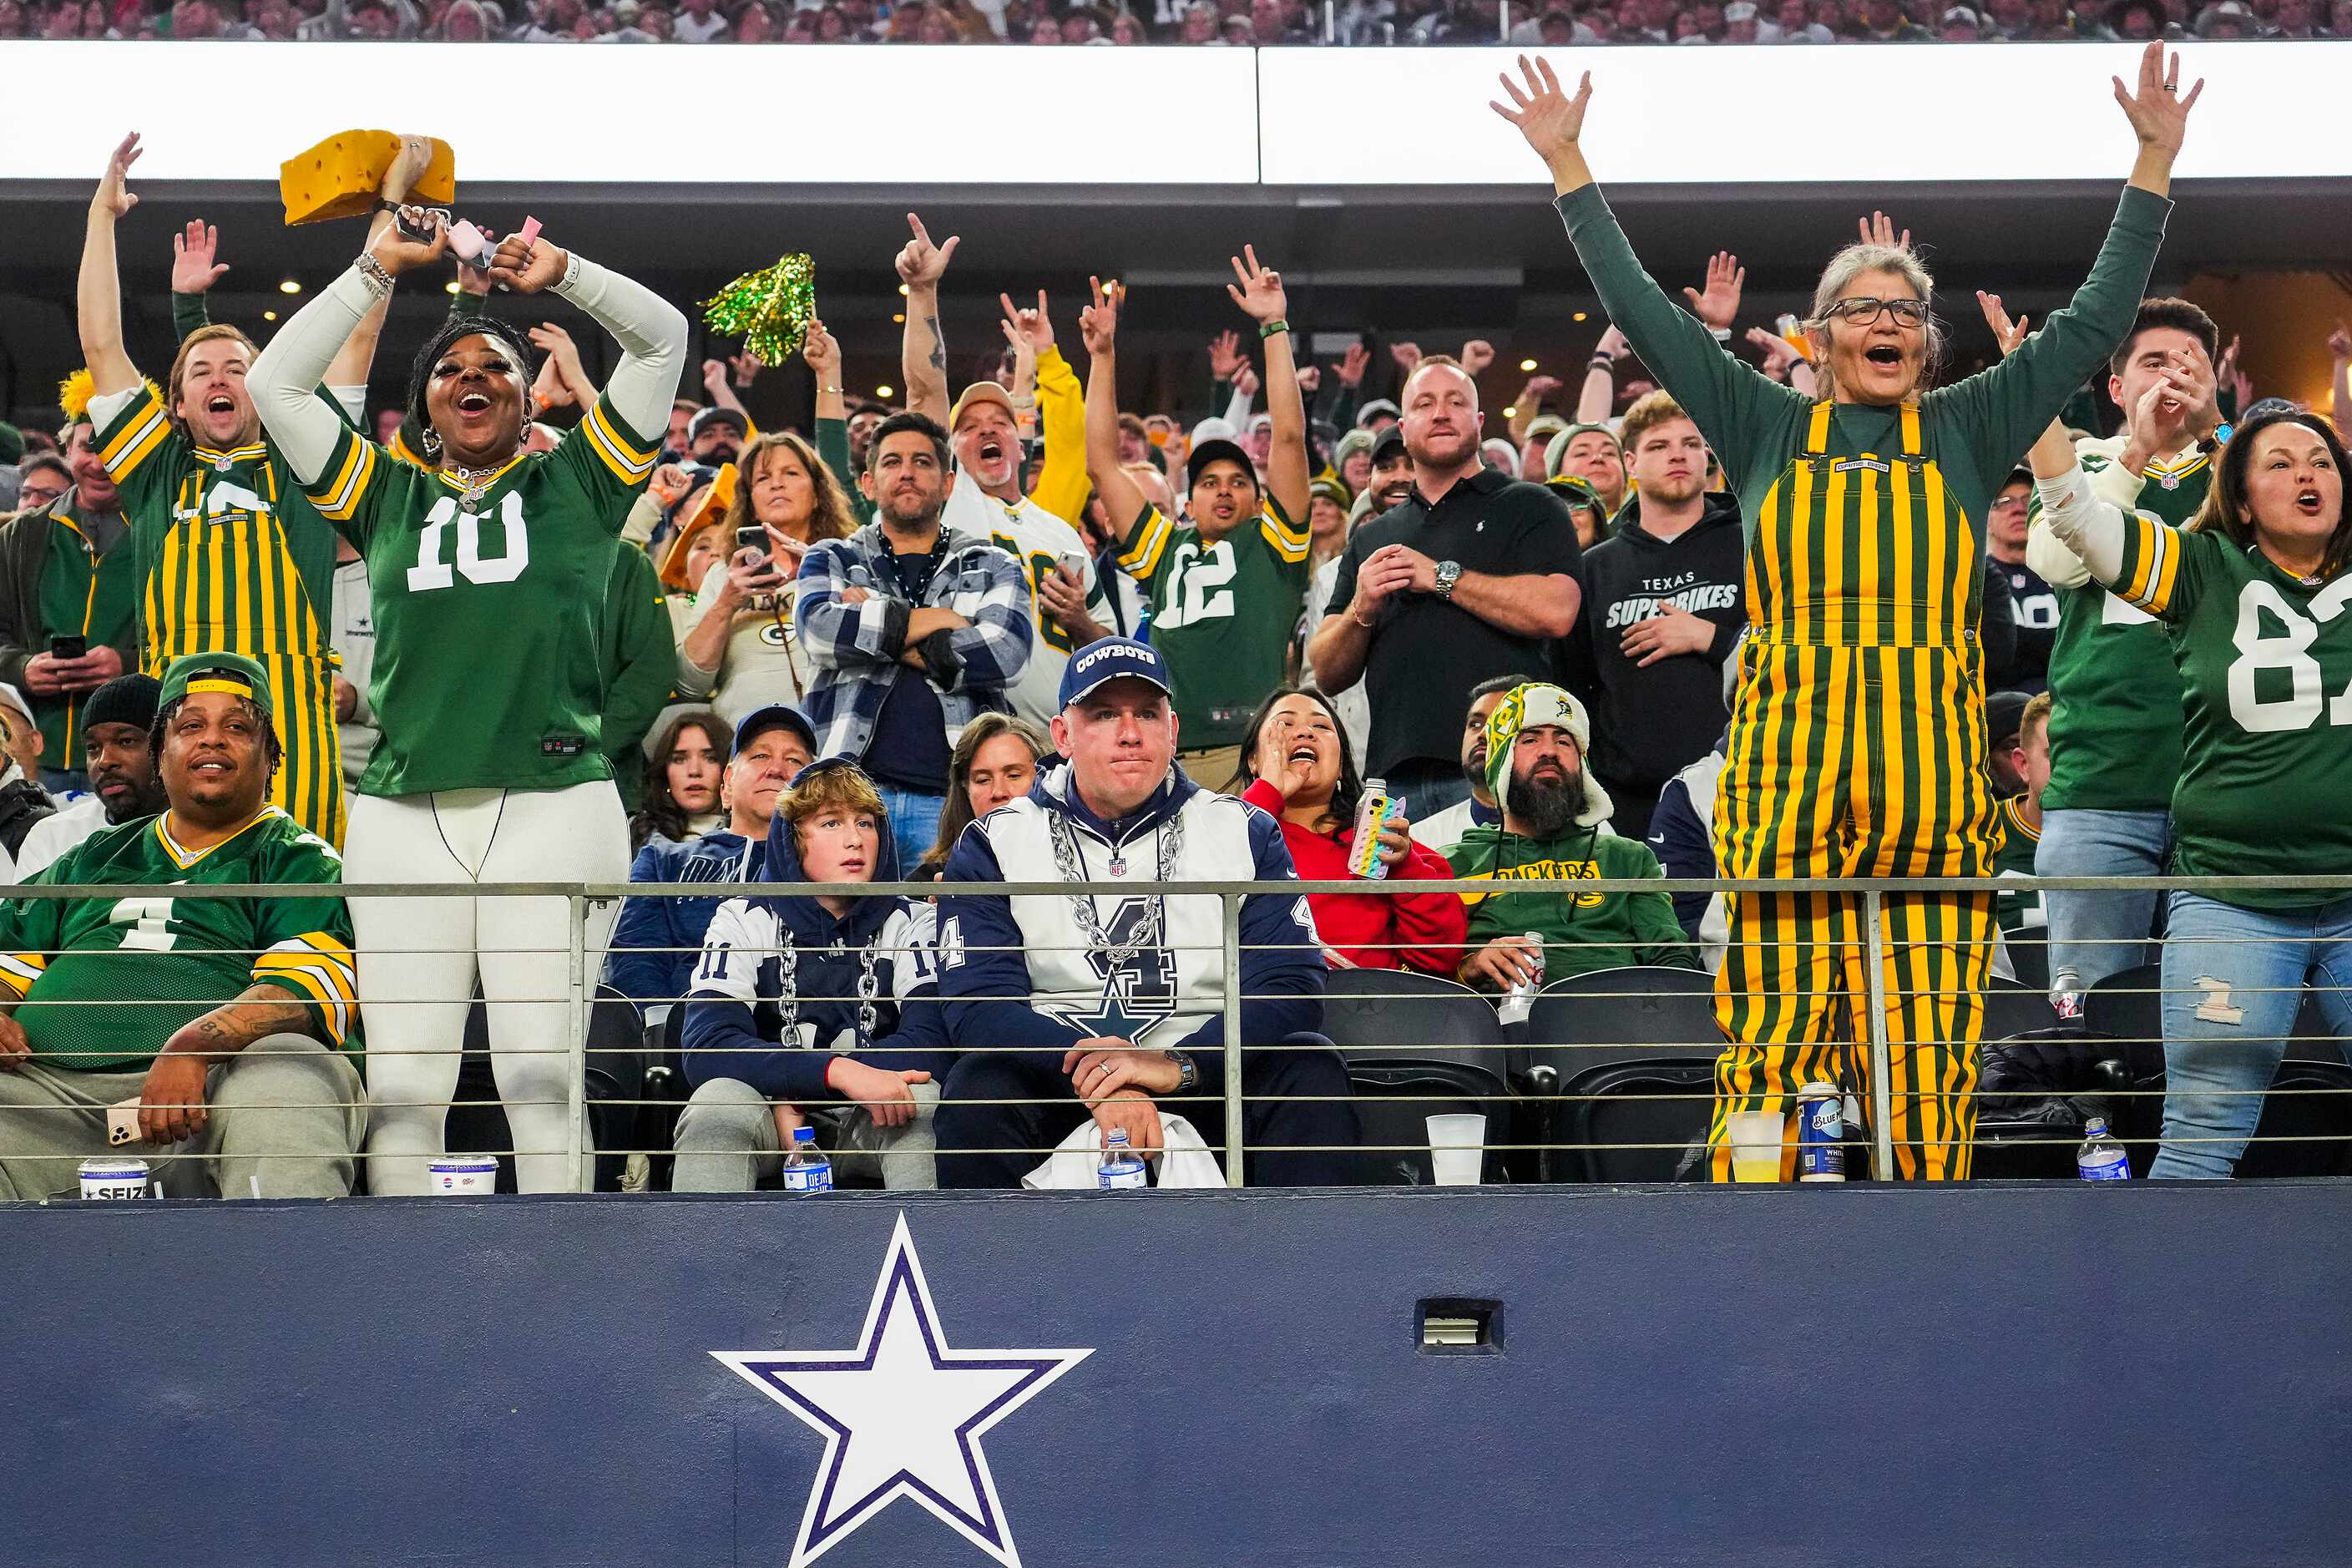 Dallas Cowboys fans sit silently as Green Bay Packers fans celebrate after a touchdown  by...